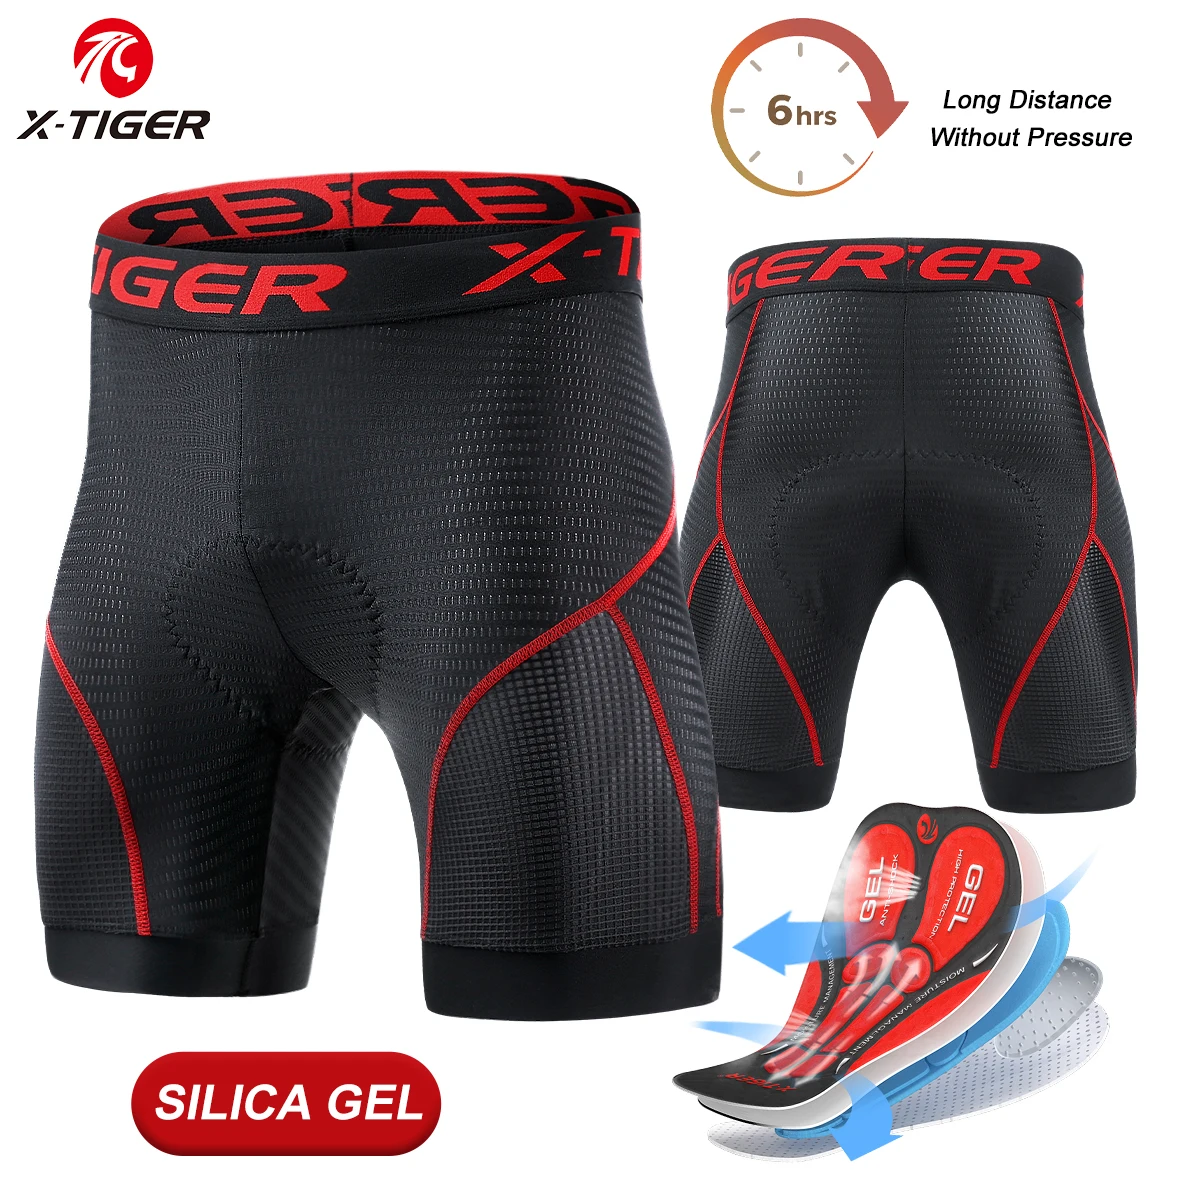 X-TIGER Cycling Short Bicycle Short Pants 5D Padded Gel Cycling Undershorts Bicycle Underwear Short Pants Bicycle Cycling Underwear Shorts 